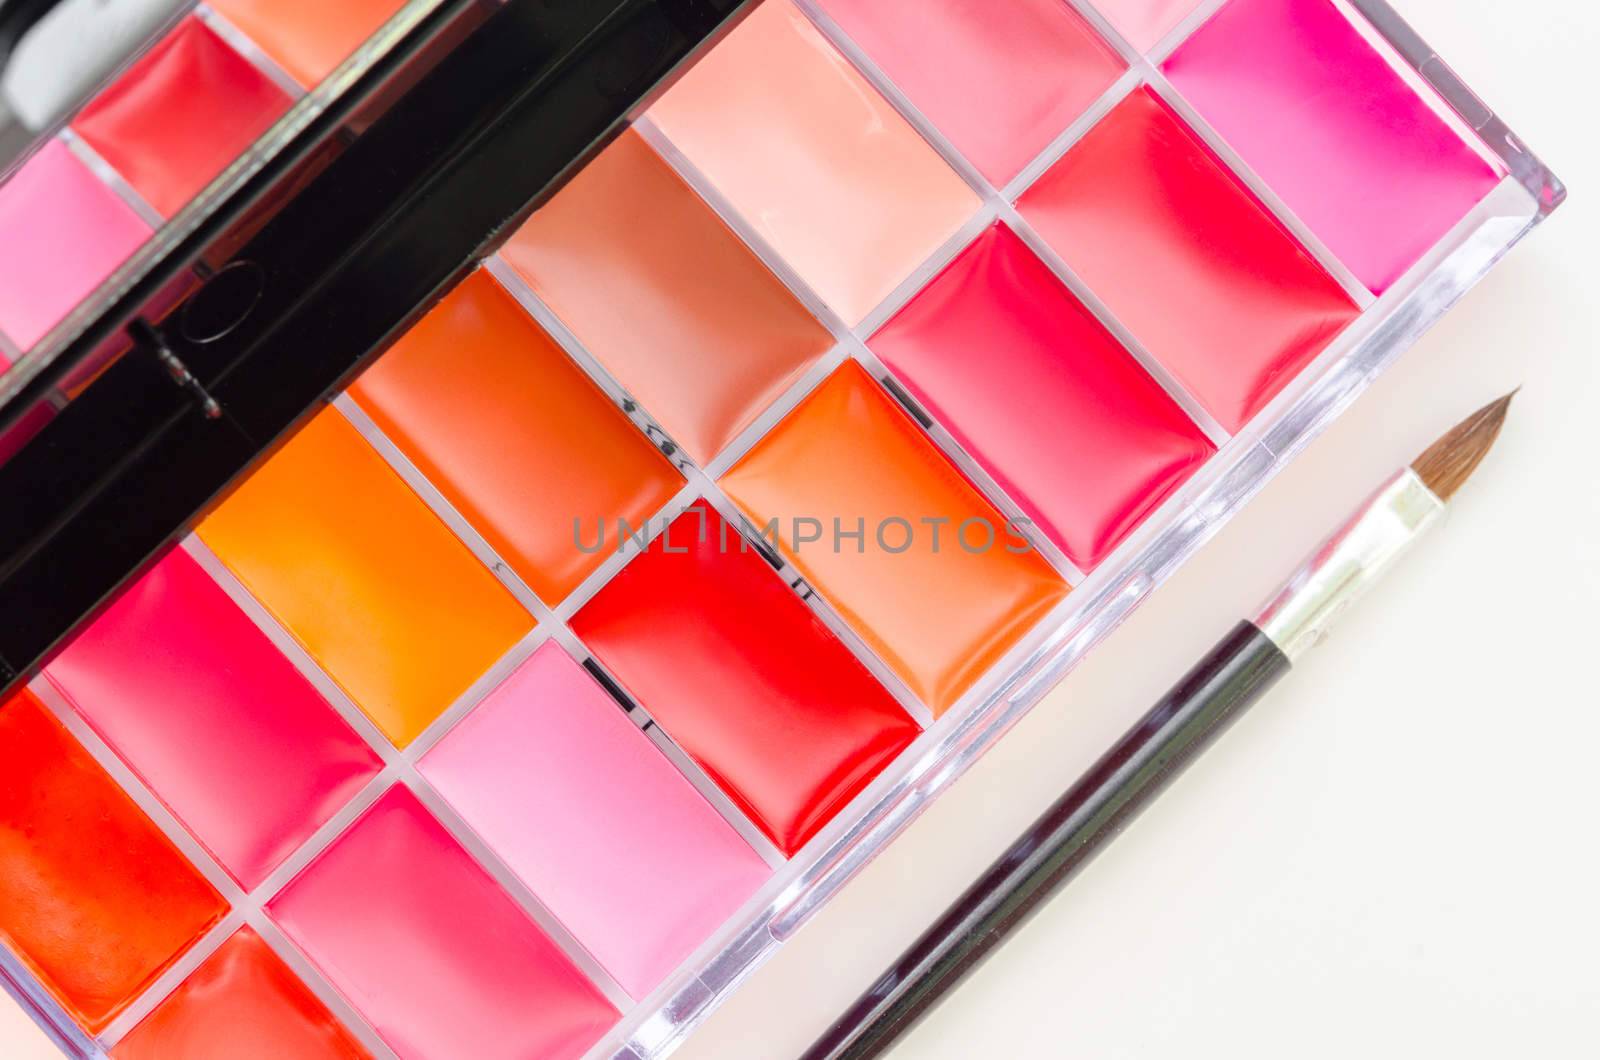 Lipstick and lipgloss makeup palette isolated on white background.